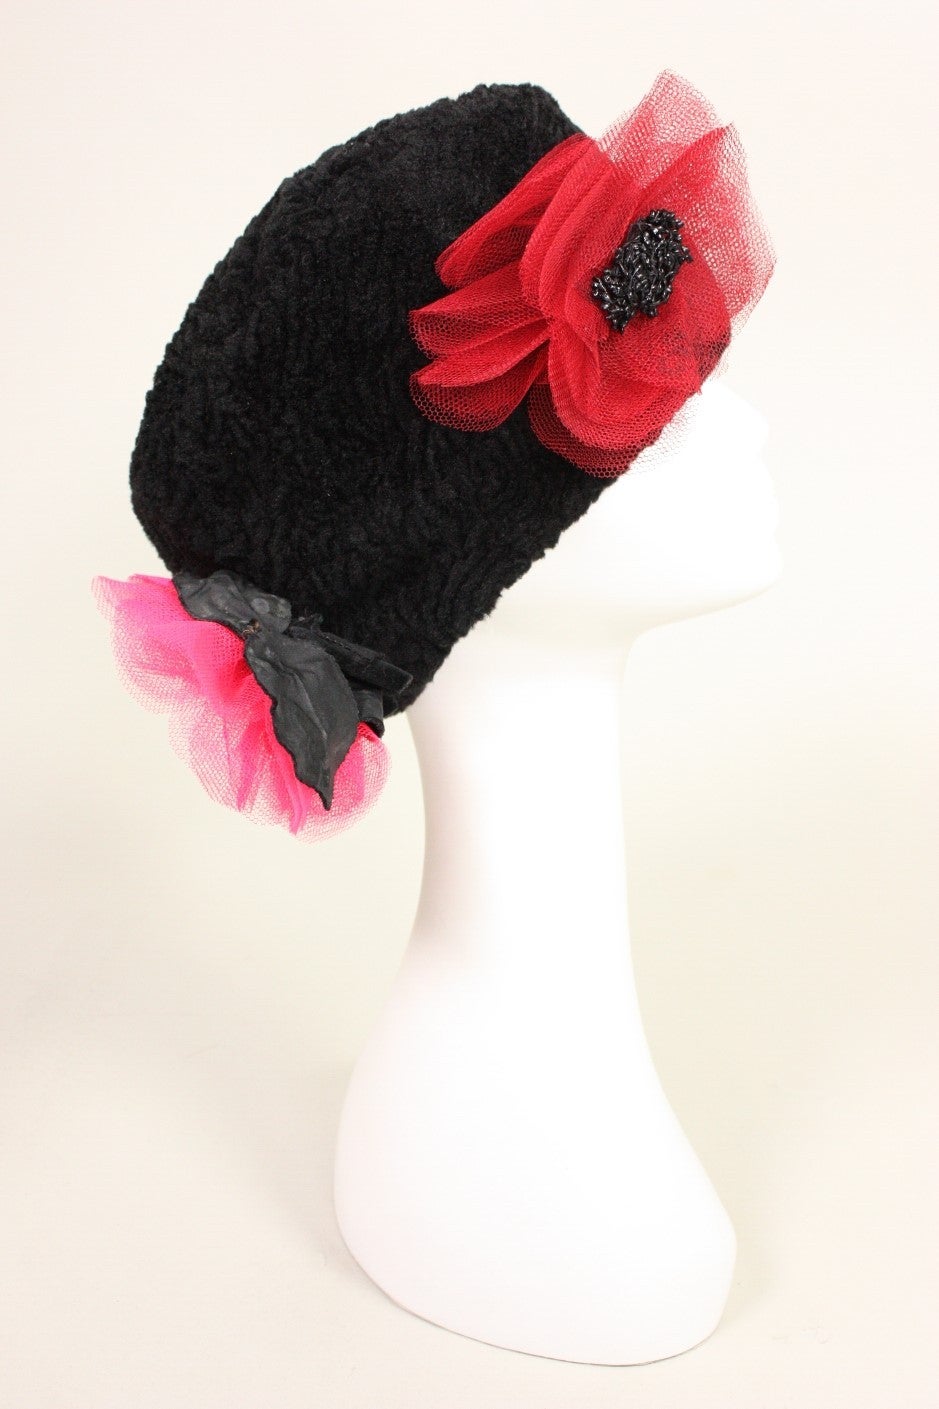 Vintage hat from Yves Saint Laurent is made of black fabric that resembles broadtail. It features four large net flowers and black velvet leaves. Lined.  Interior circumference measures 20 1/4